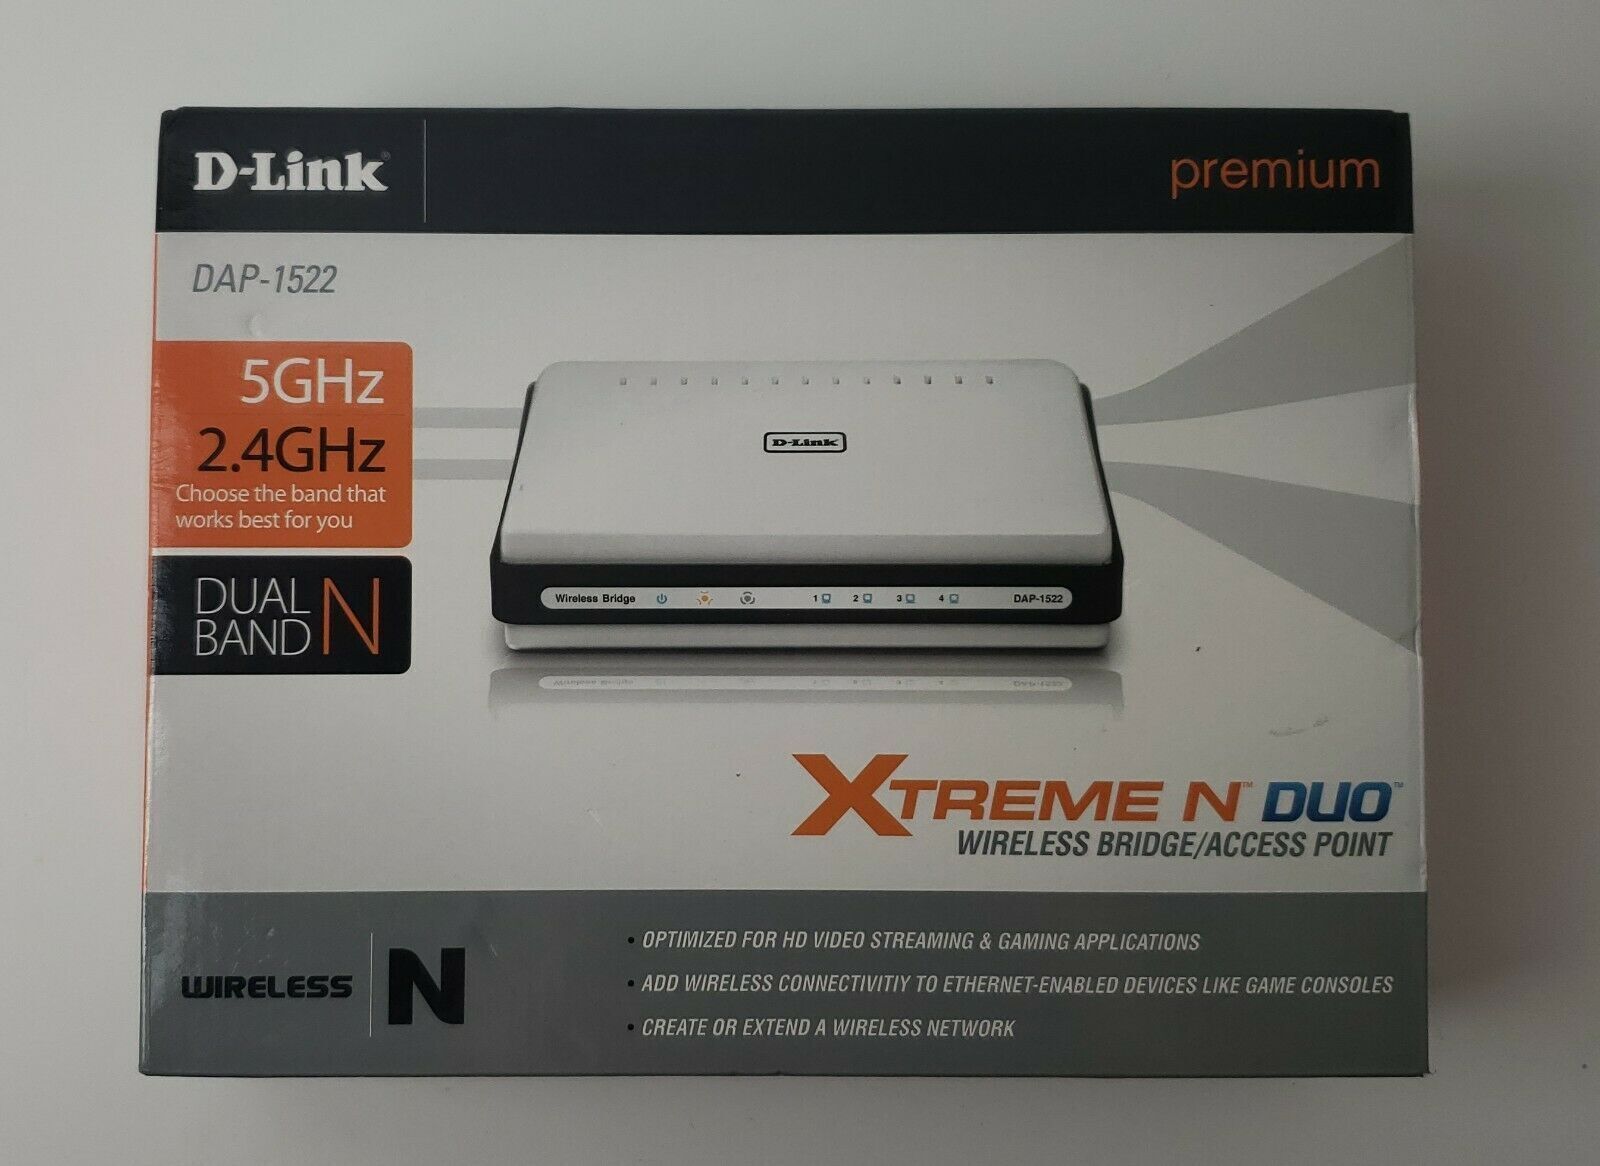 DAP-1522 D-Link Xtreme N Duo Wireless Bridge/Access Point (New/sealed)